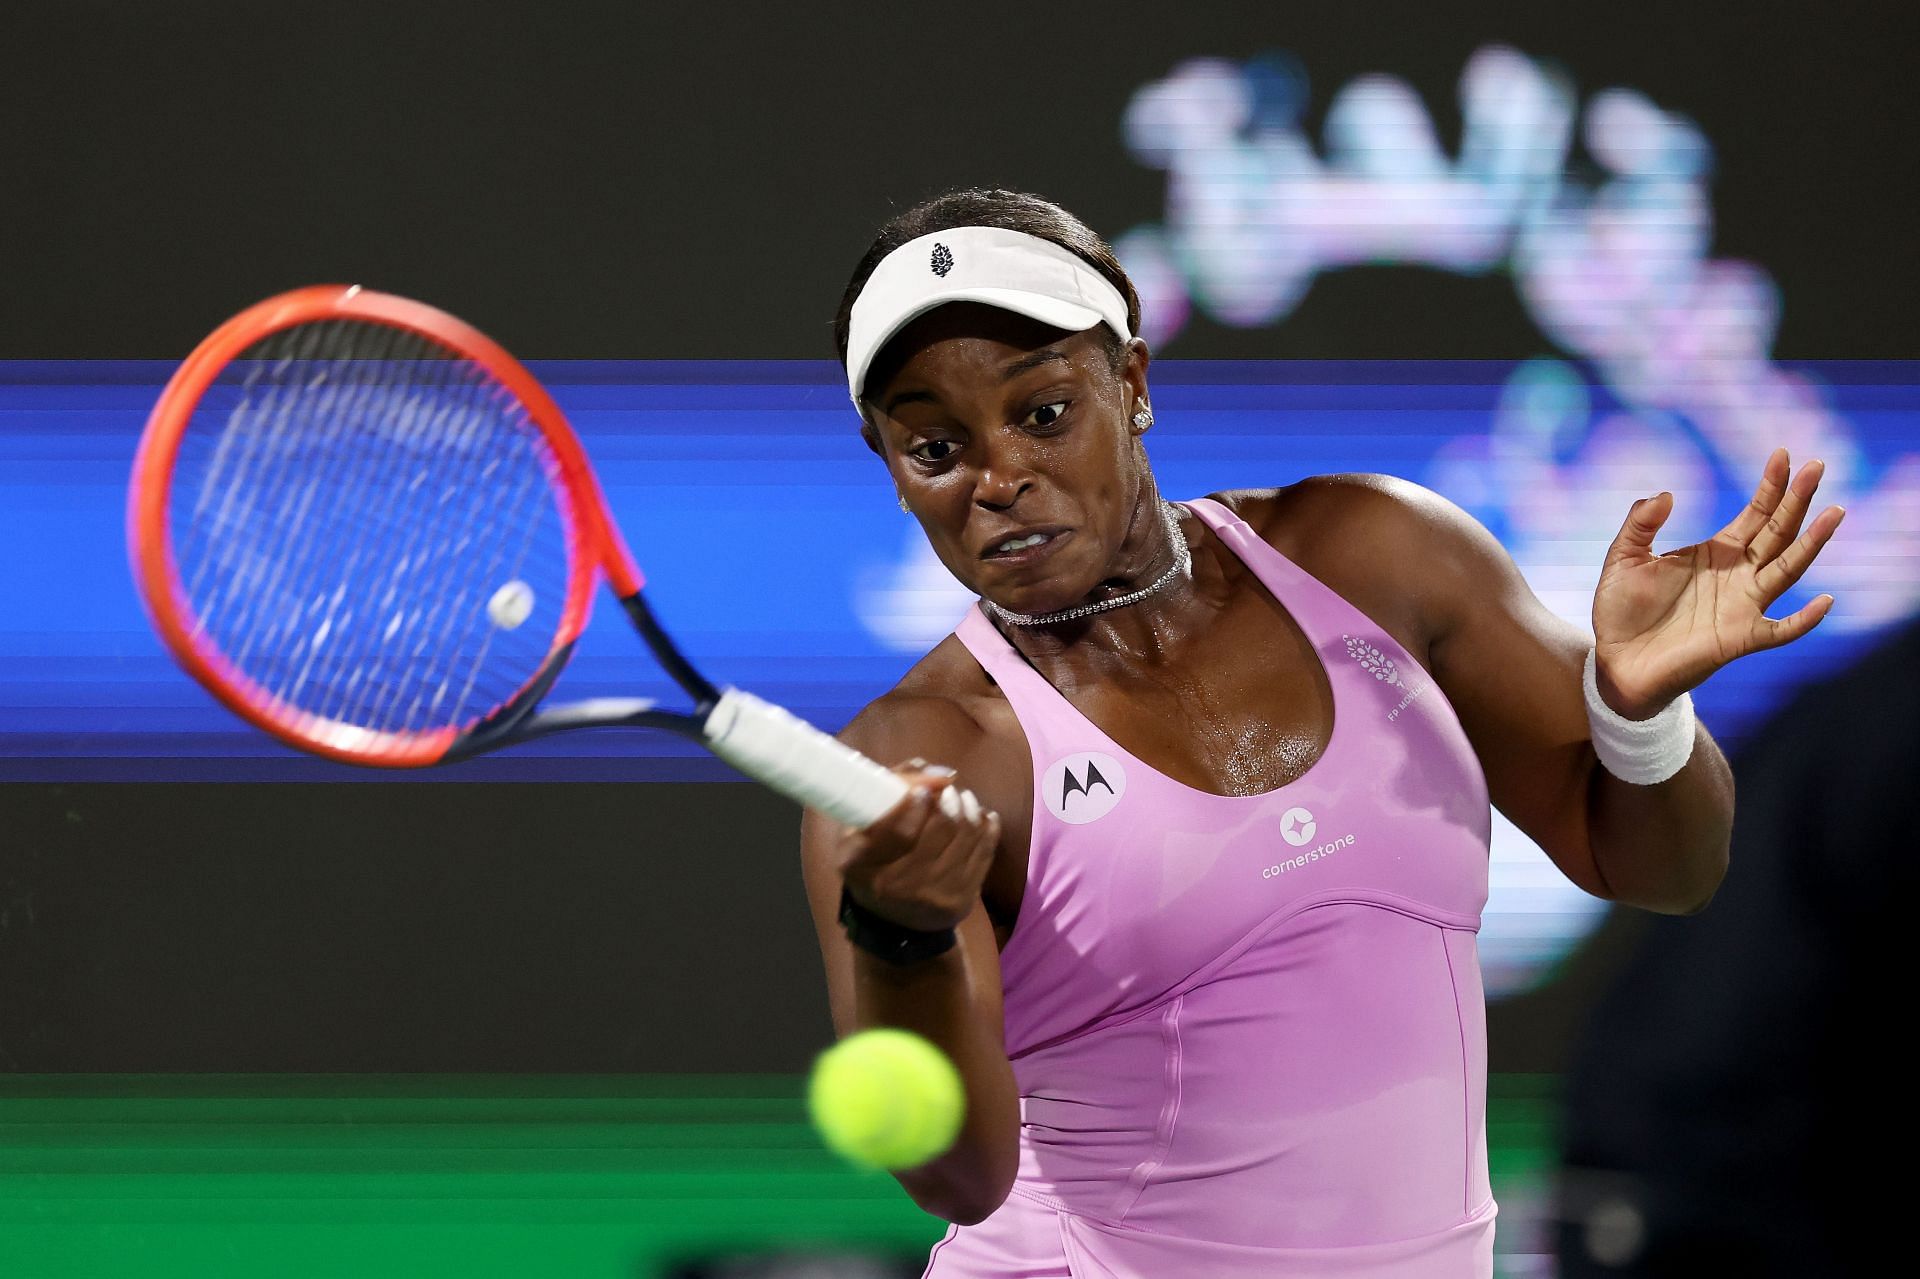 Stephens at the Dubai Duty Free Tennis Championships - Day 3